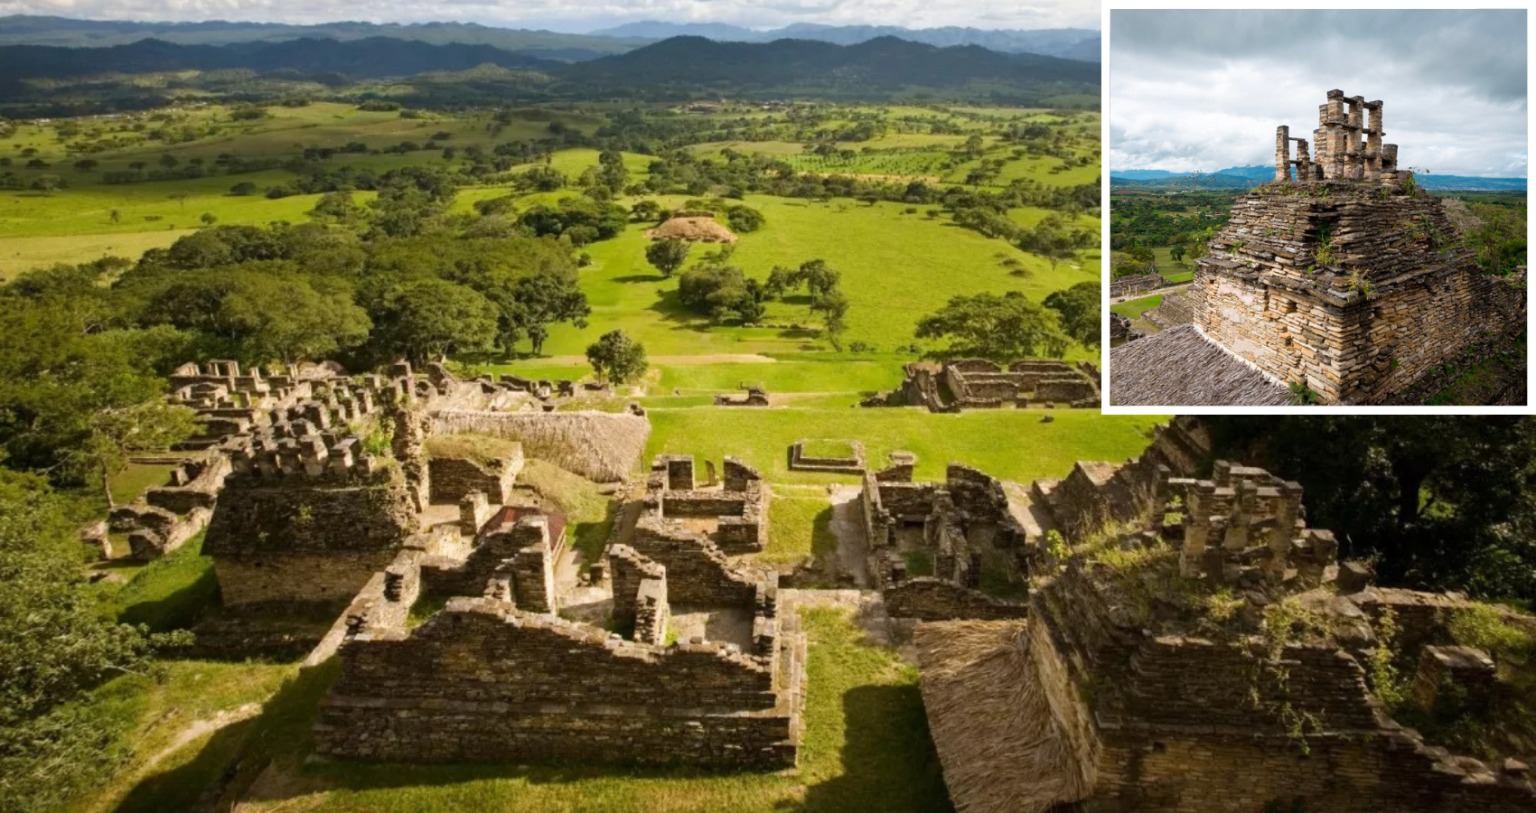 Rubber balls used in famous Maya game contained ashes of cremated rulers, archaeologists claim